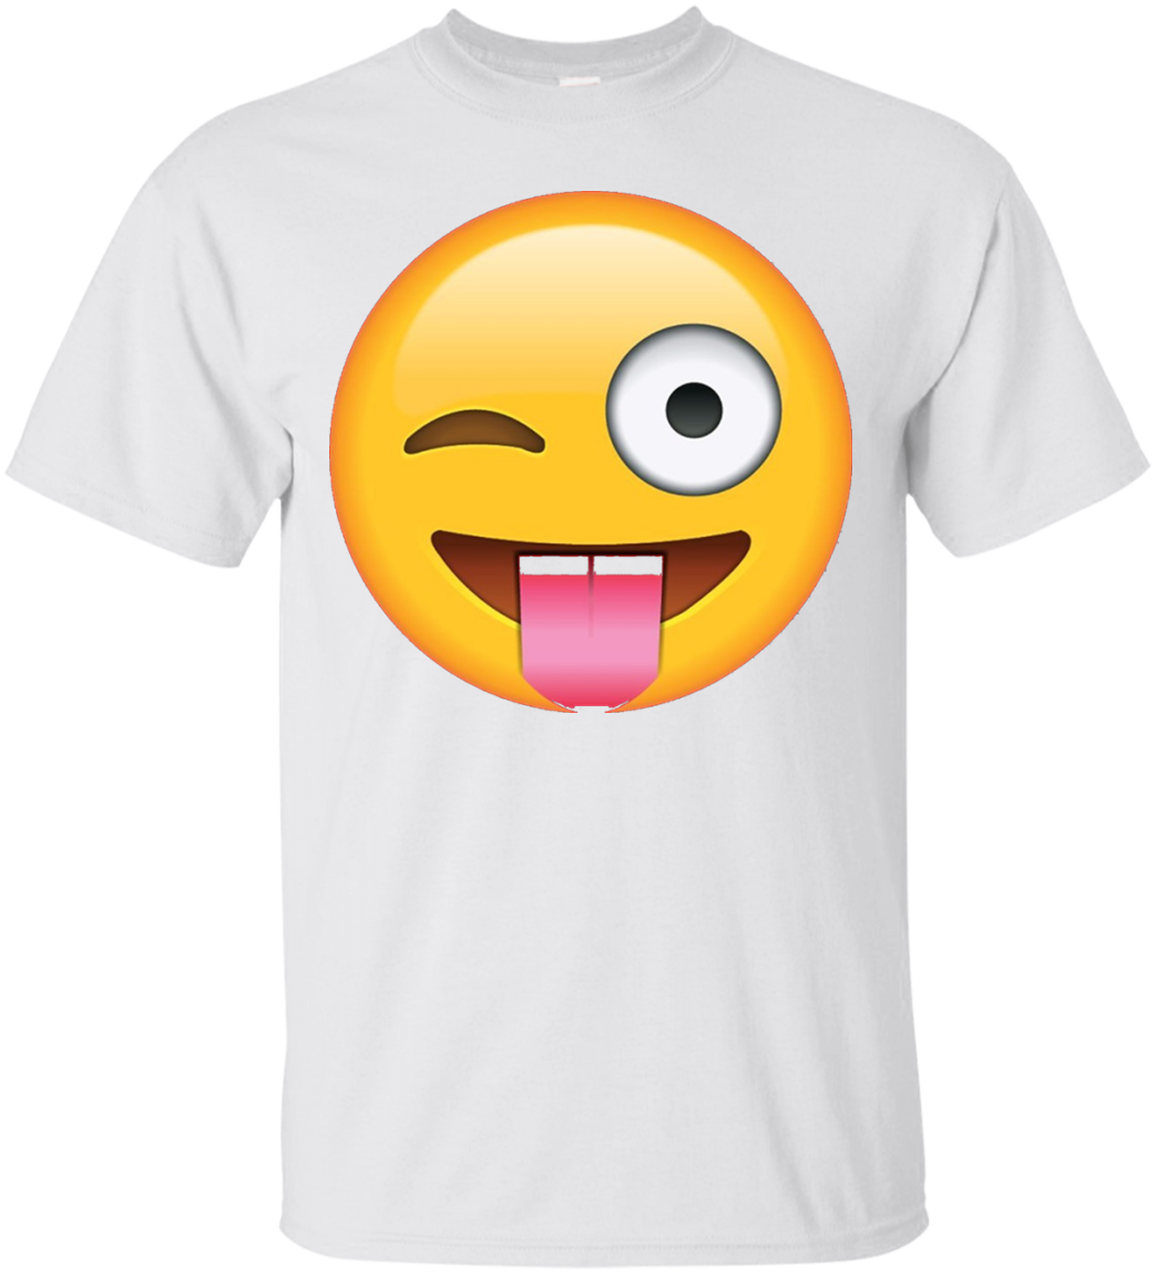 A White T-shirt With A Yellow Emoji On It